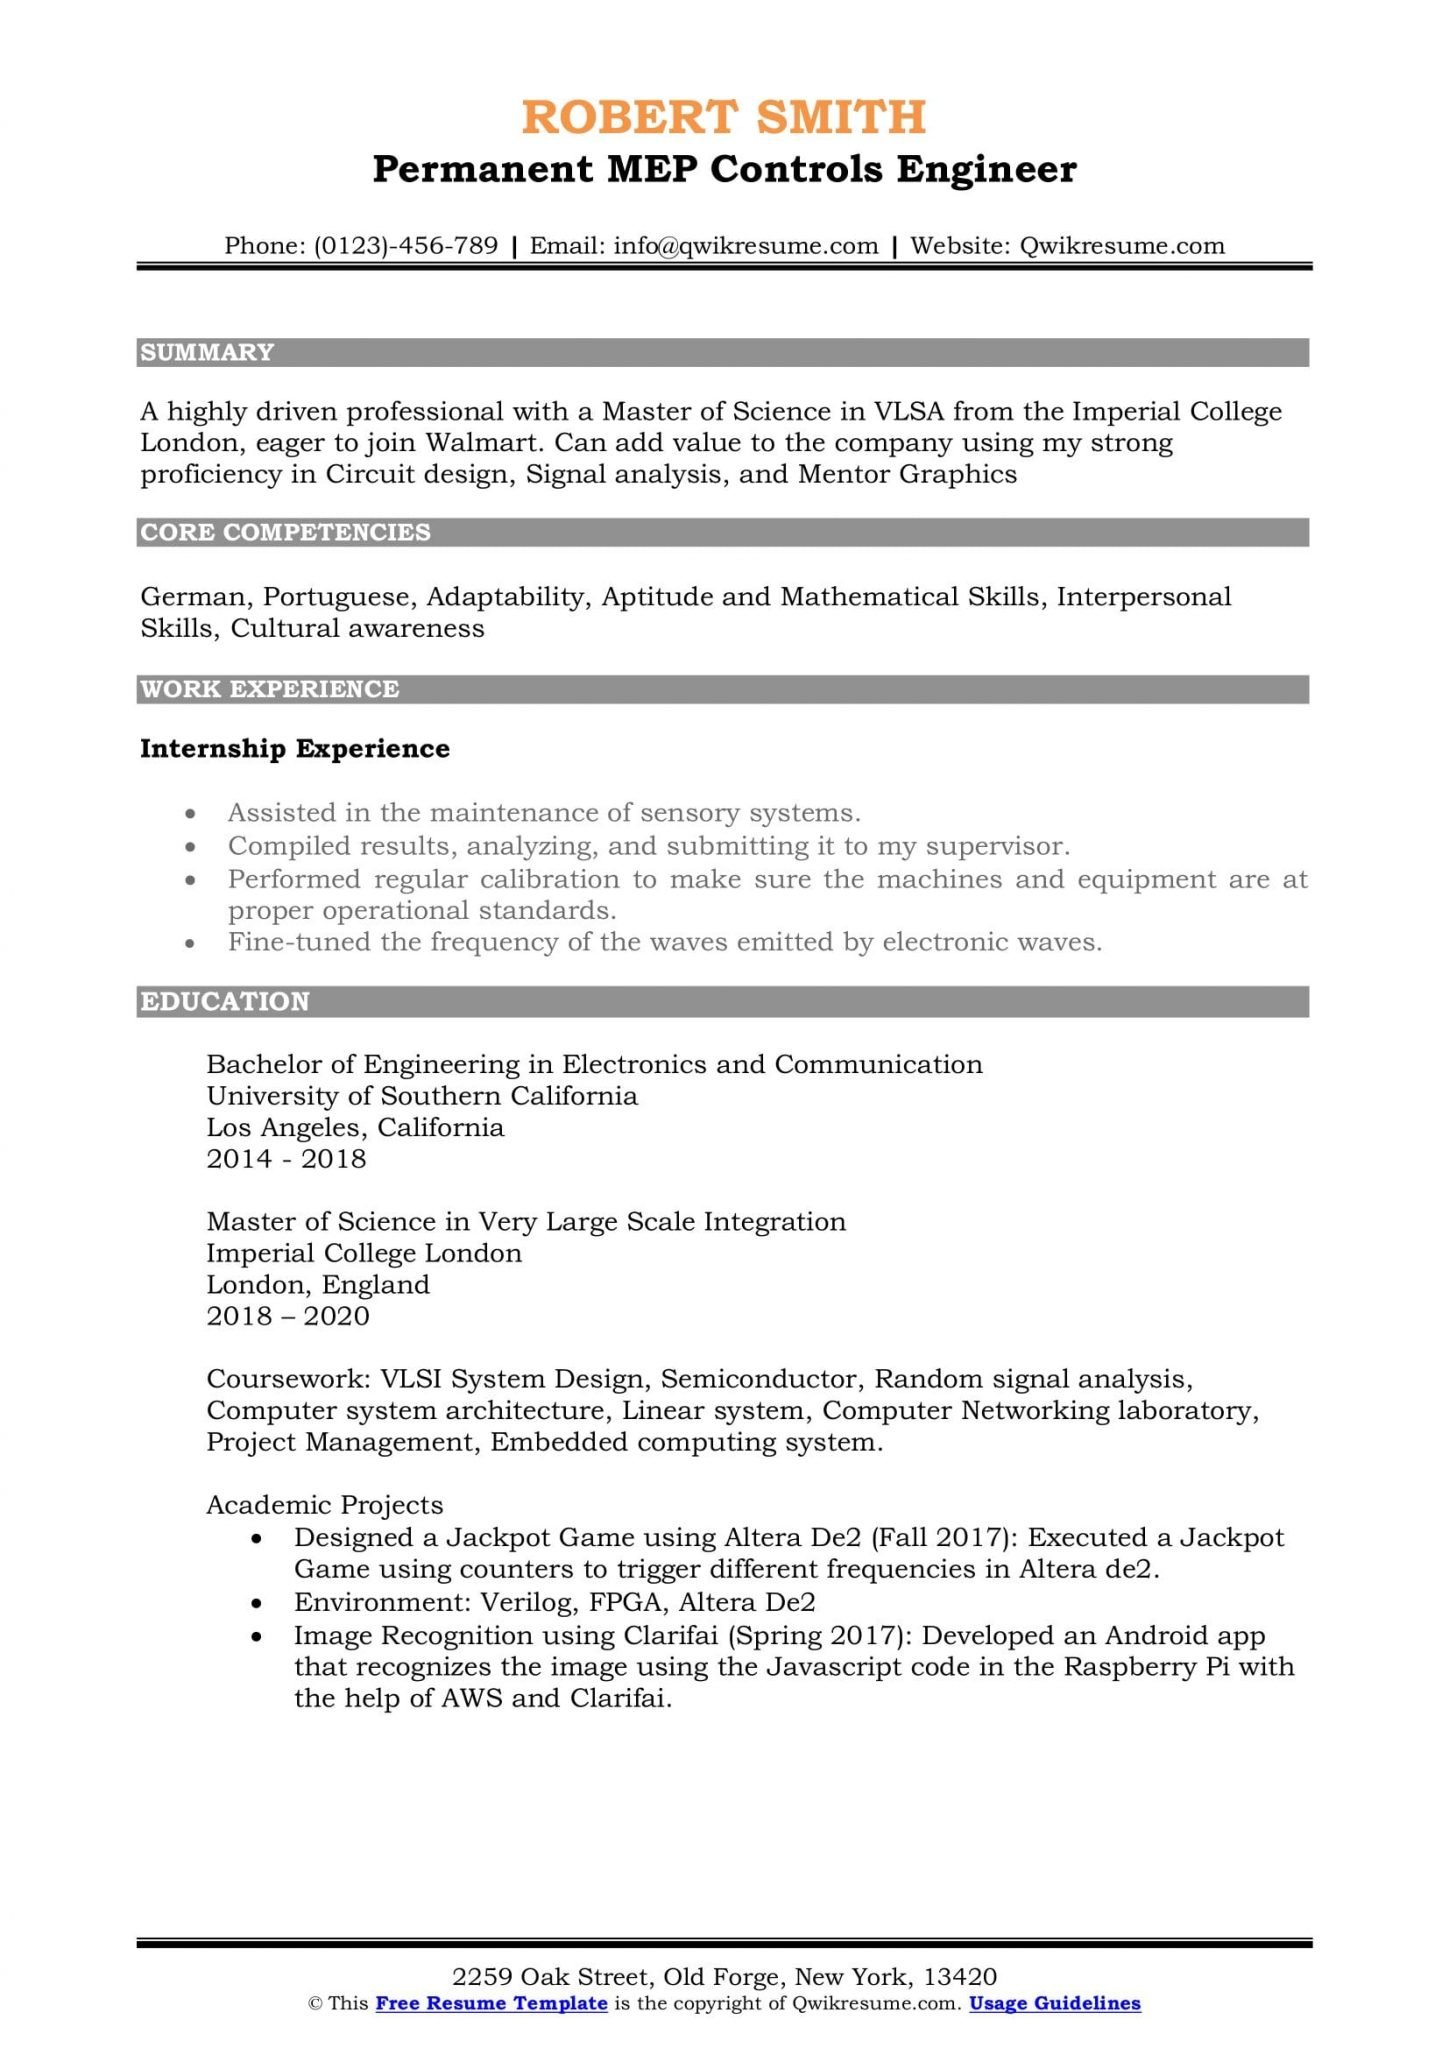 Study Abroad Experience on Resume : How to Include with Example